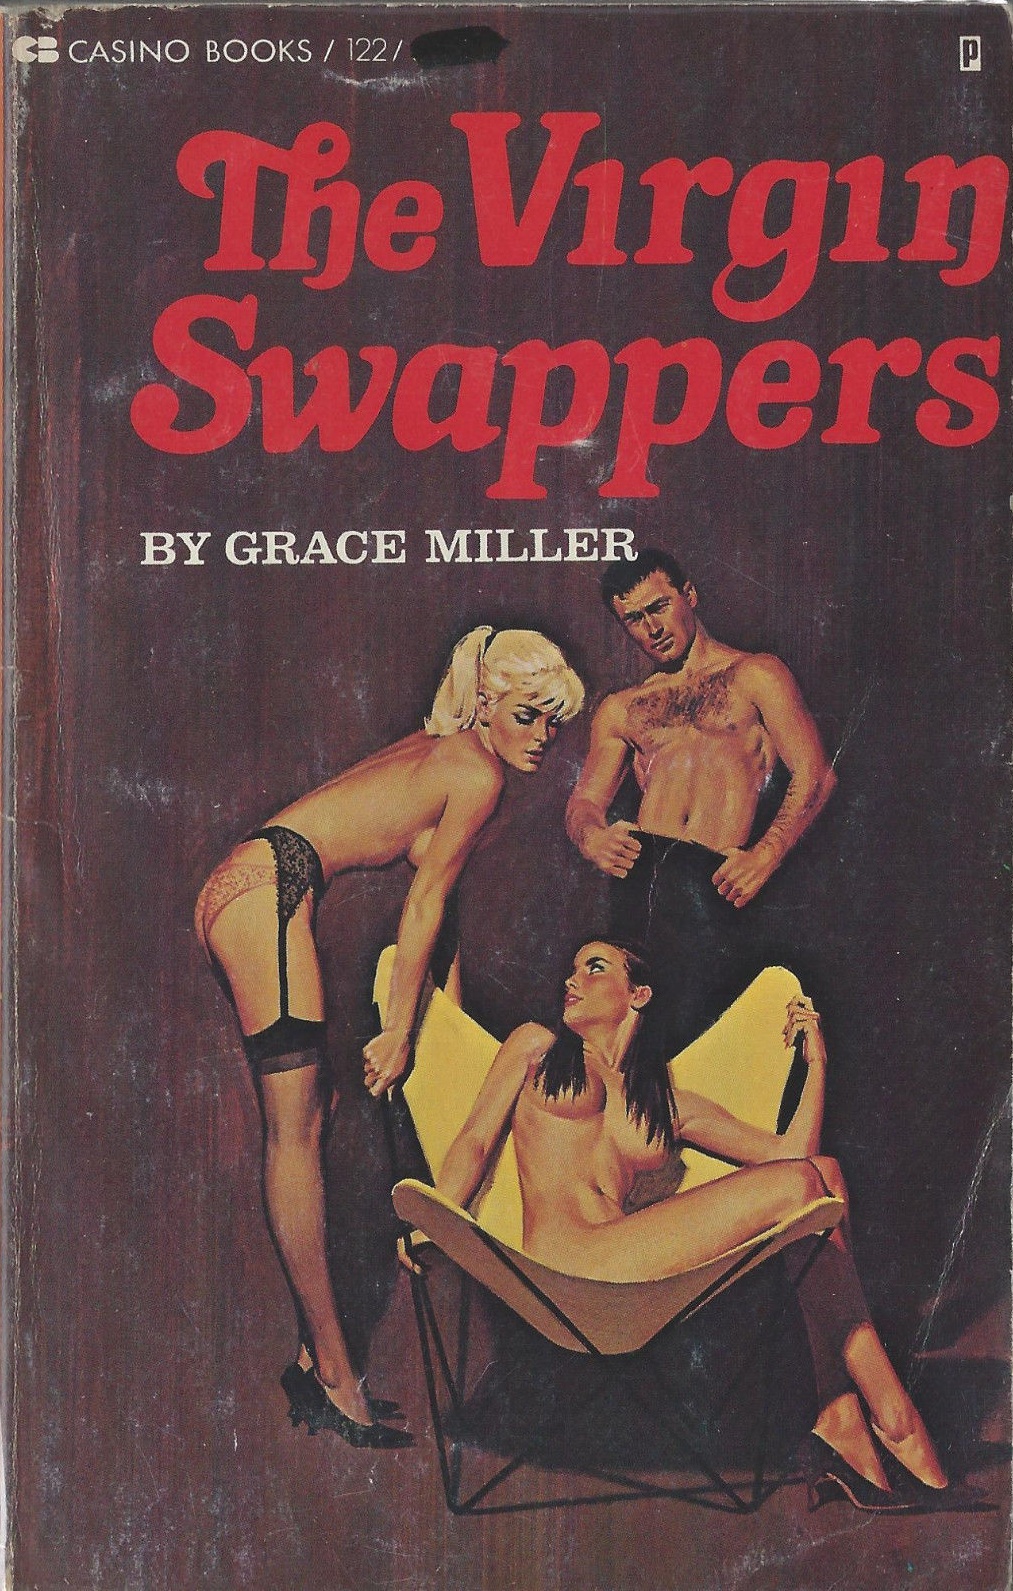 A Man Called Sex / The Virgin Swappers -- Pulp Covers